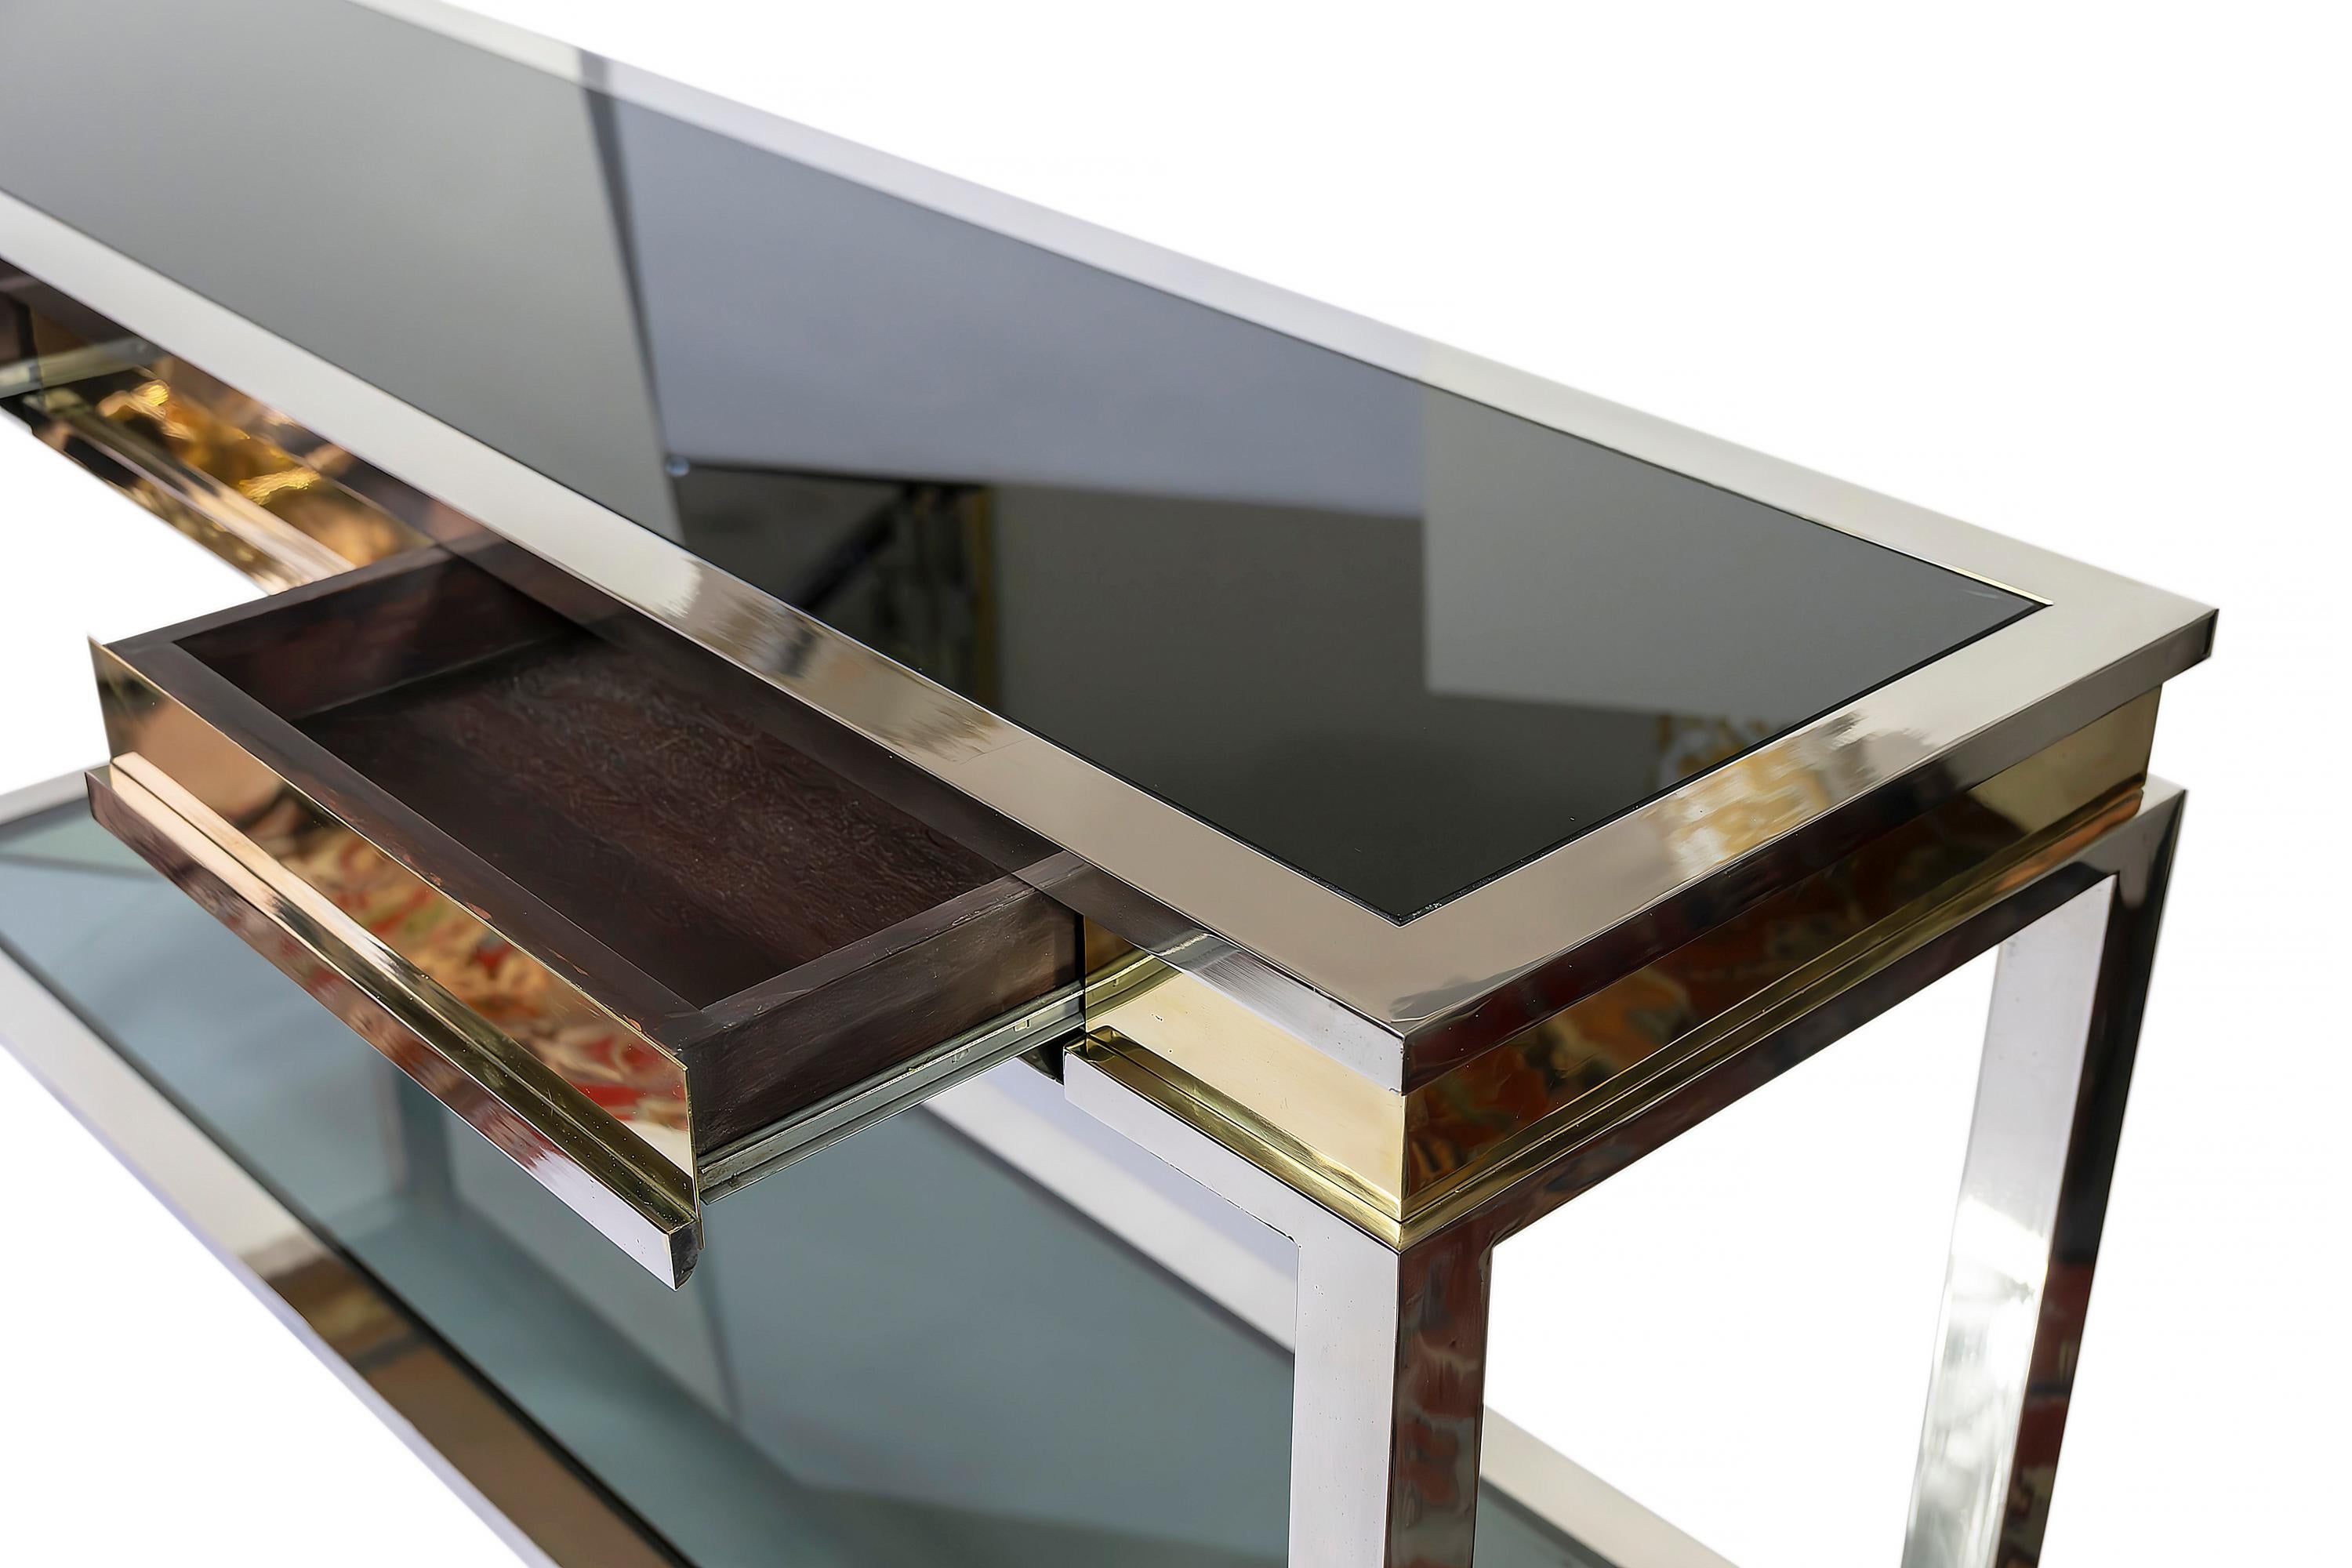 20th Century Mid-Century Italian Console Table with Drawers in Brass, Chrome, Glass, 1970's For Sale